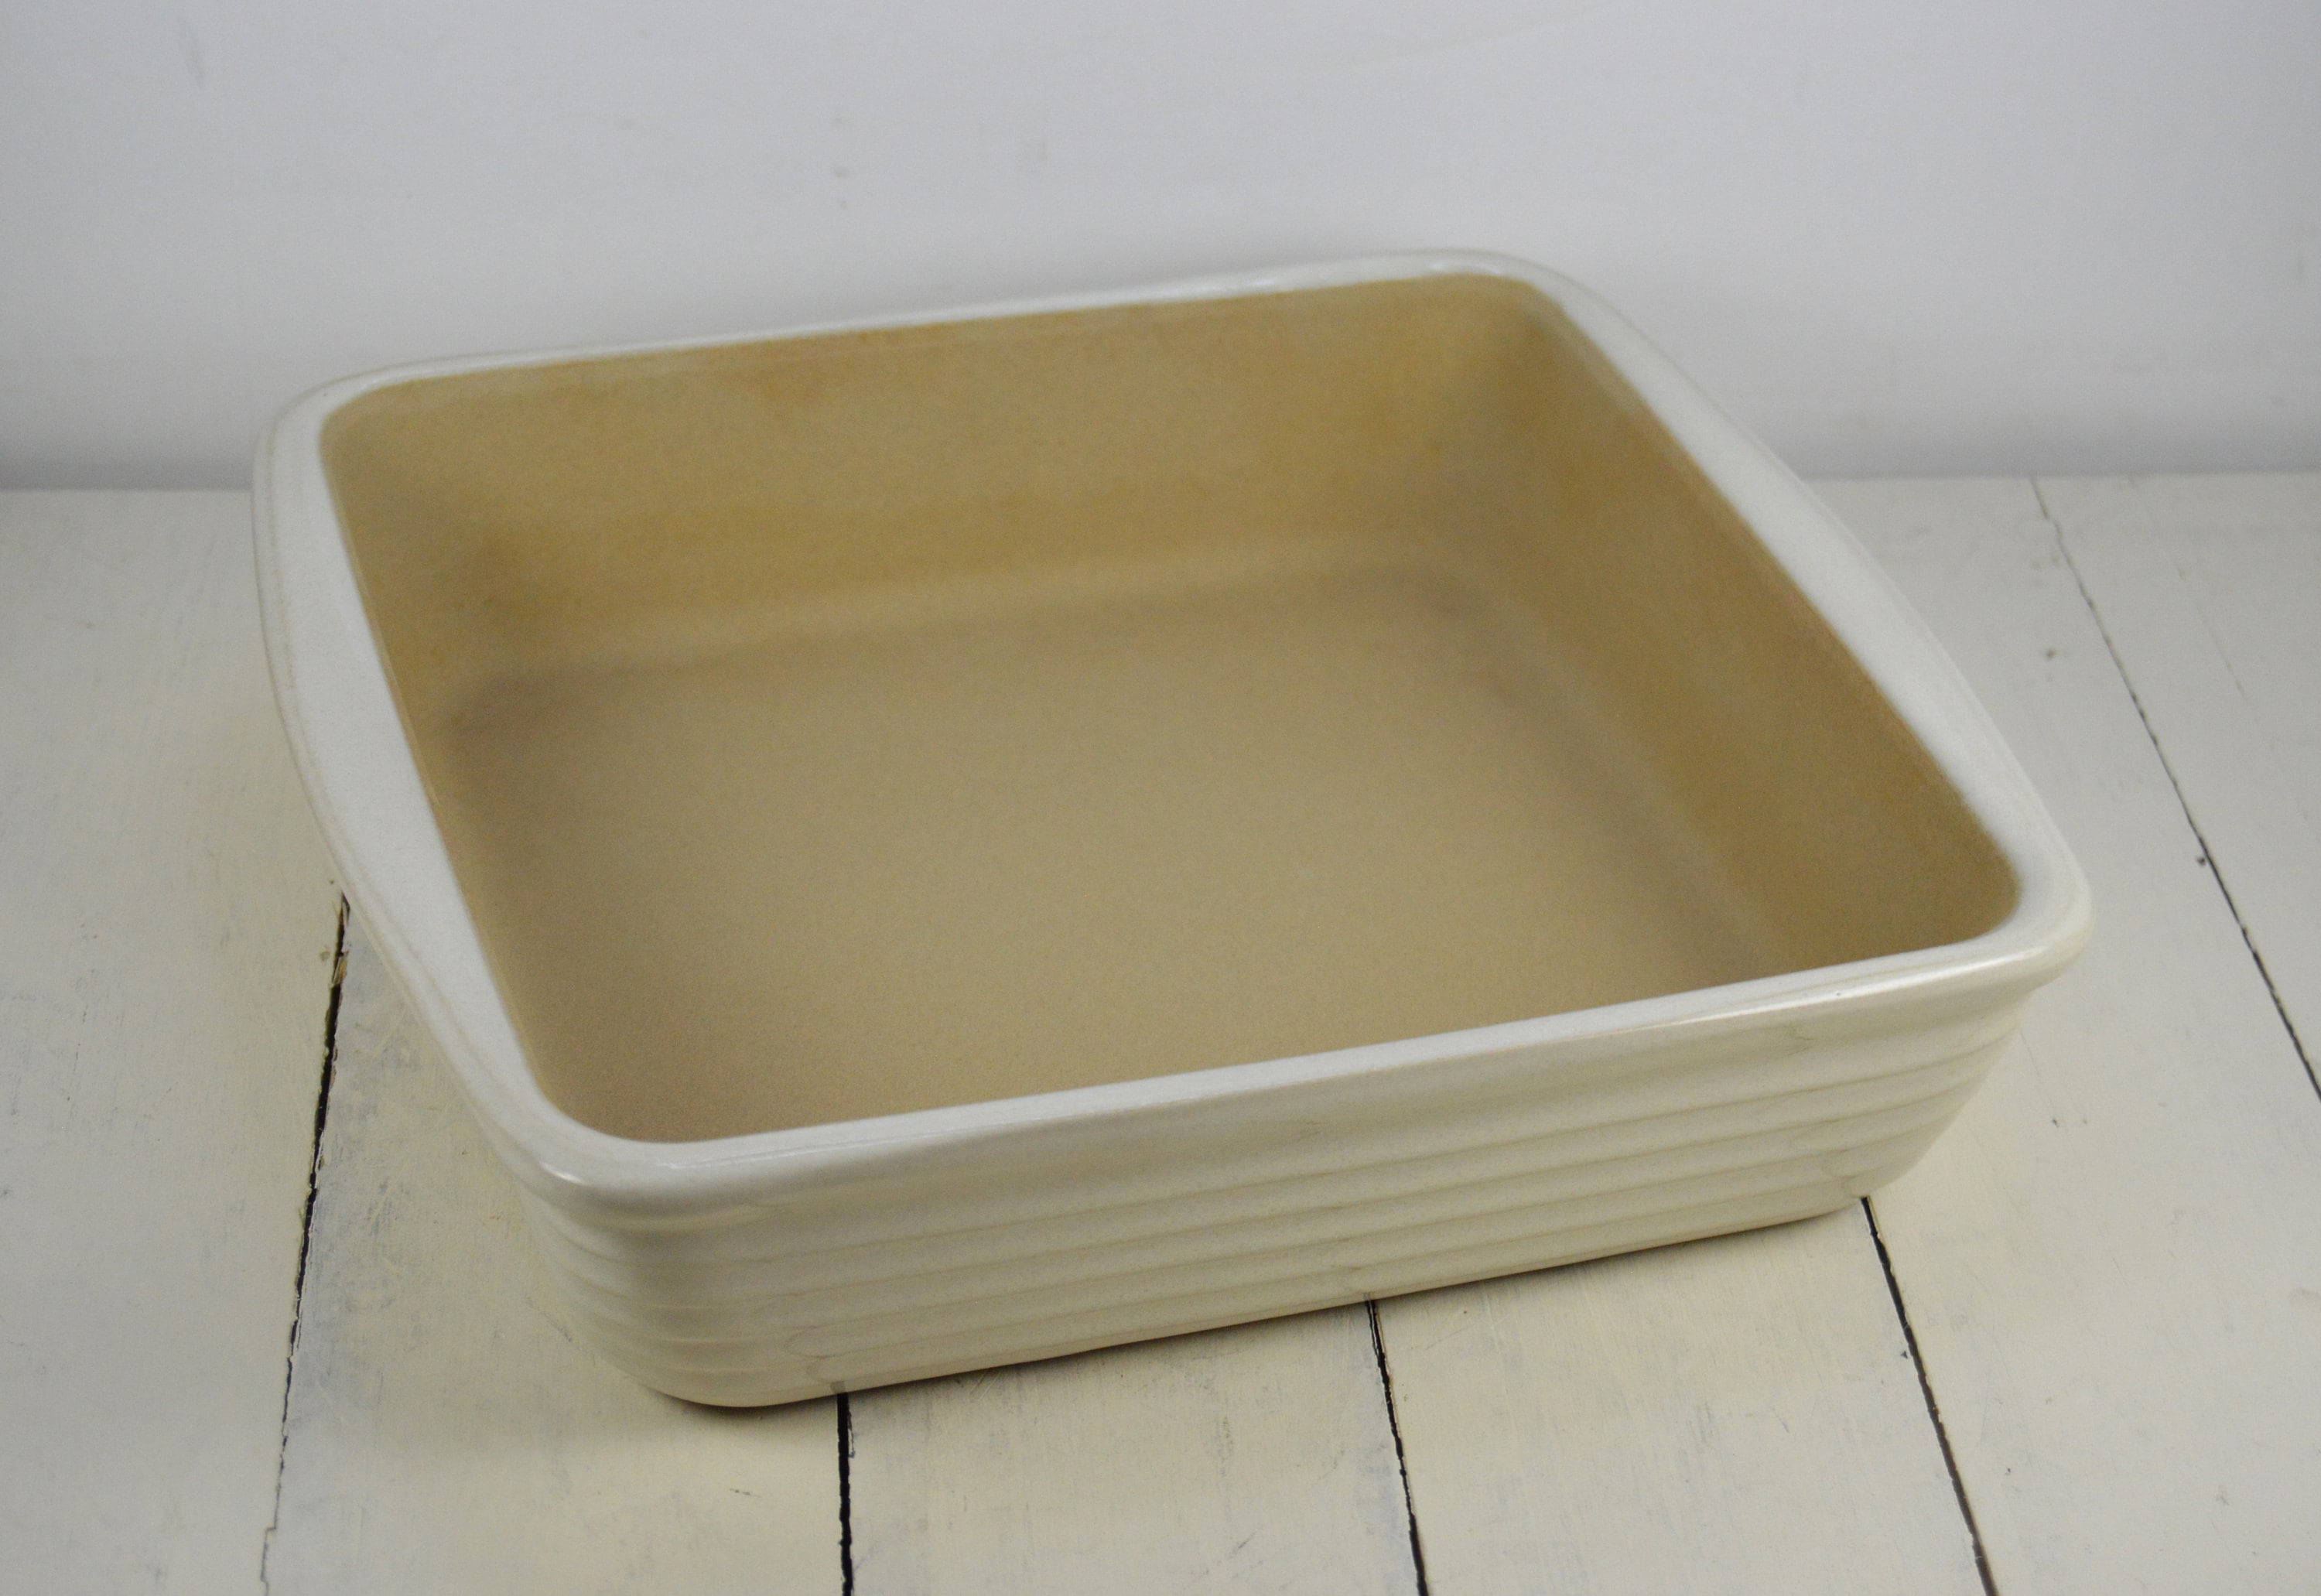 The Pampered Chef VANILLA 9 X 9 X 2 Square Baker With Handles, Brownie Pan,  New Traditions Collection, Glazed Stoneware, Used 